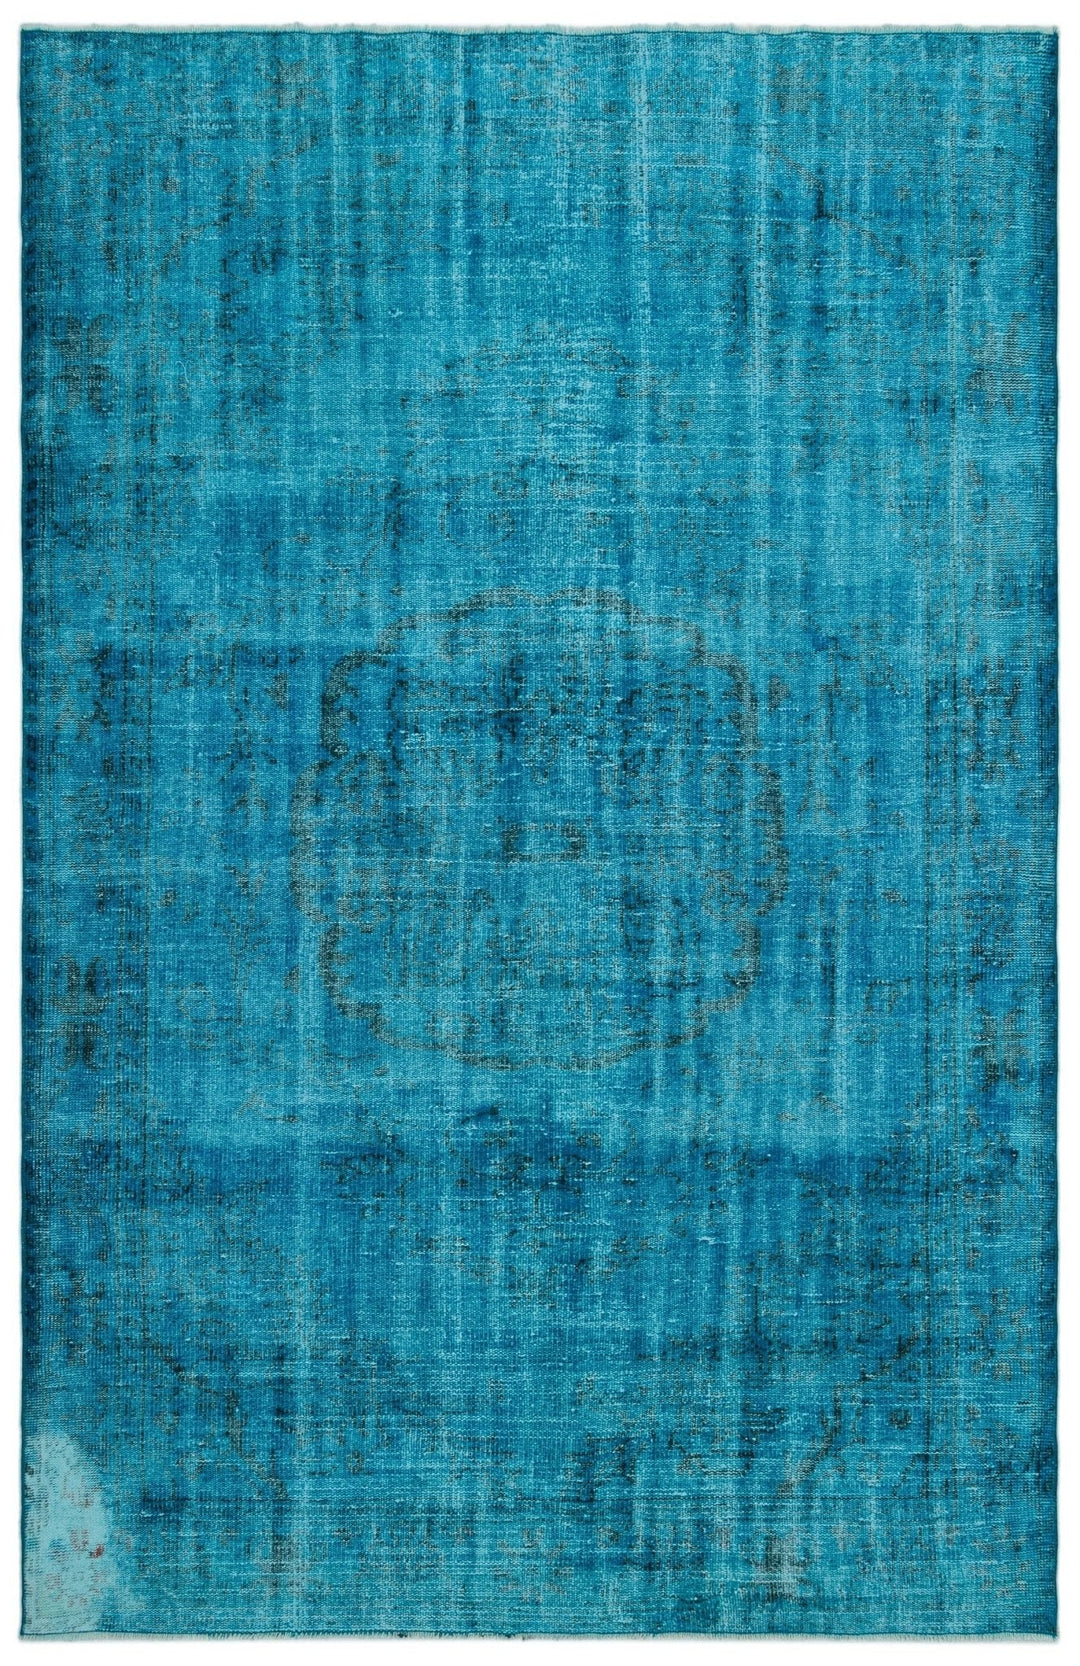 Athens 23202 Turquoise Tumbled Wool Hand Woven Rug 184 x 282